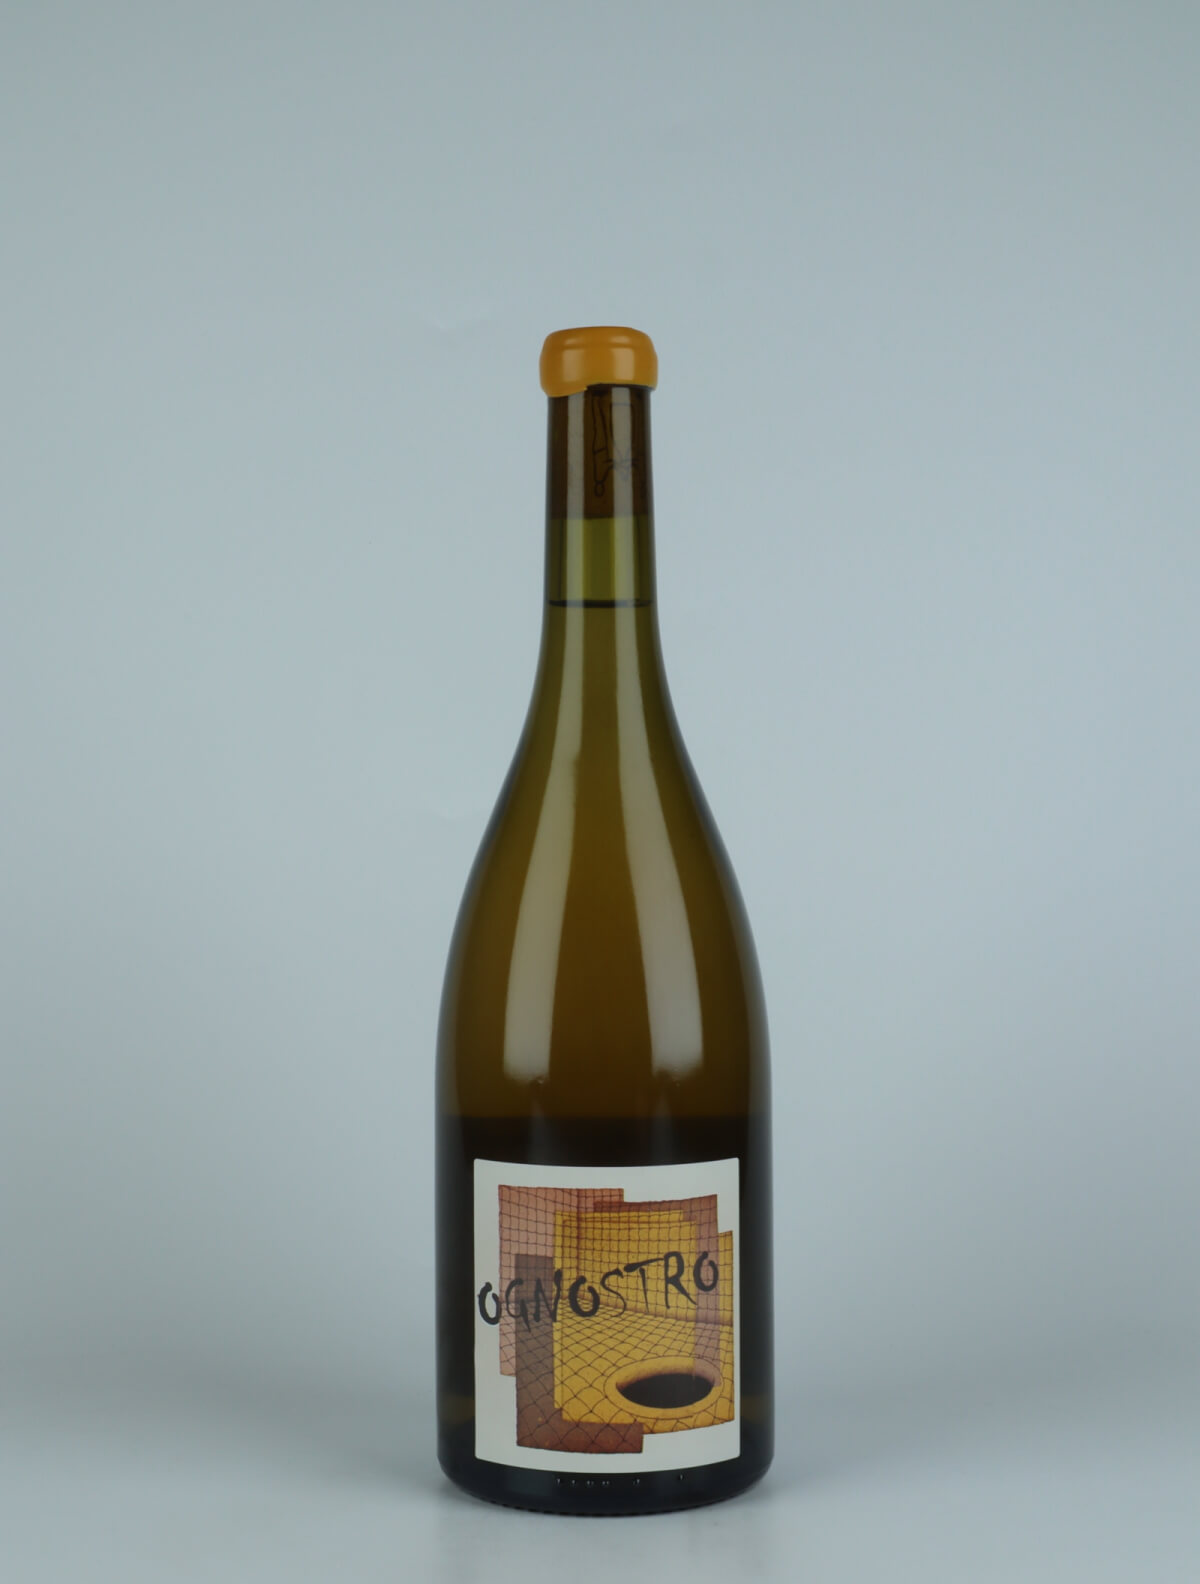 A bottle 2021 Ognostro Bianco White wine from Marco Tinessa, Campania in Italy